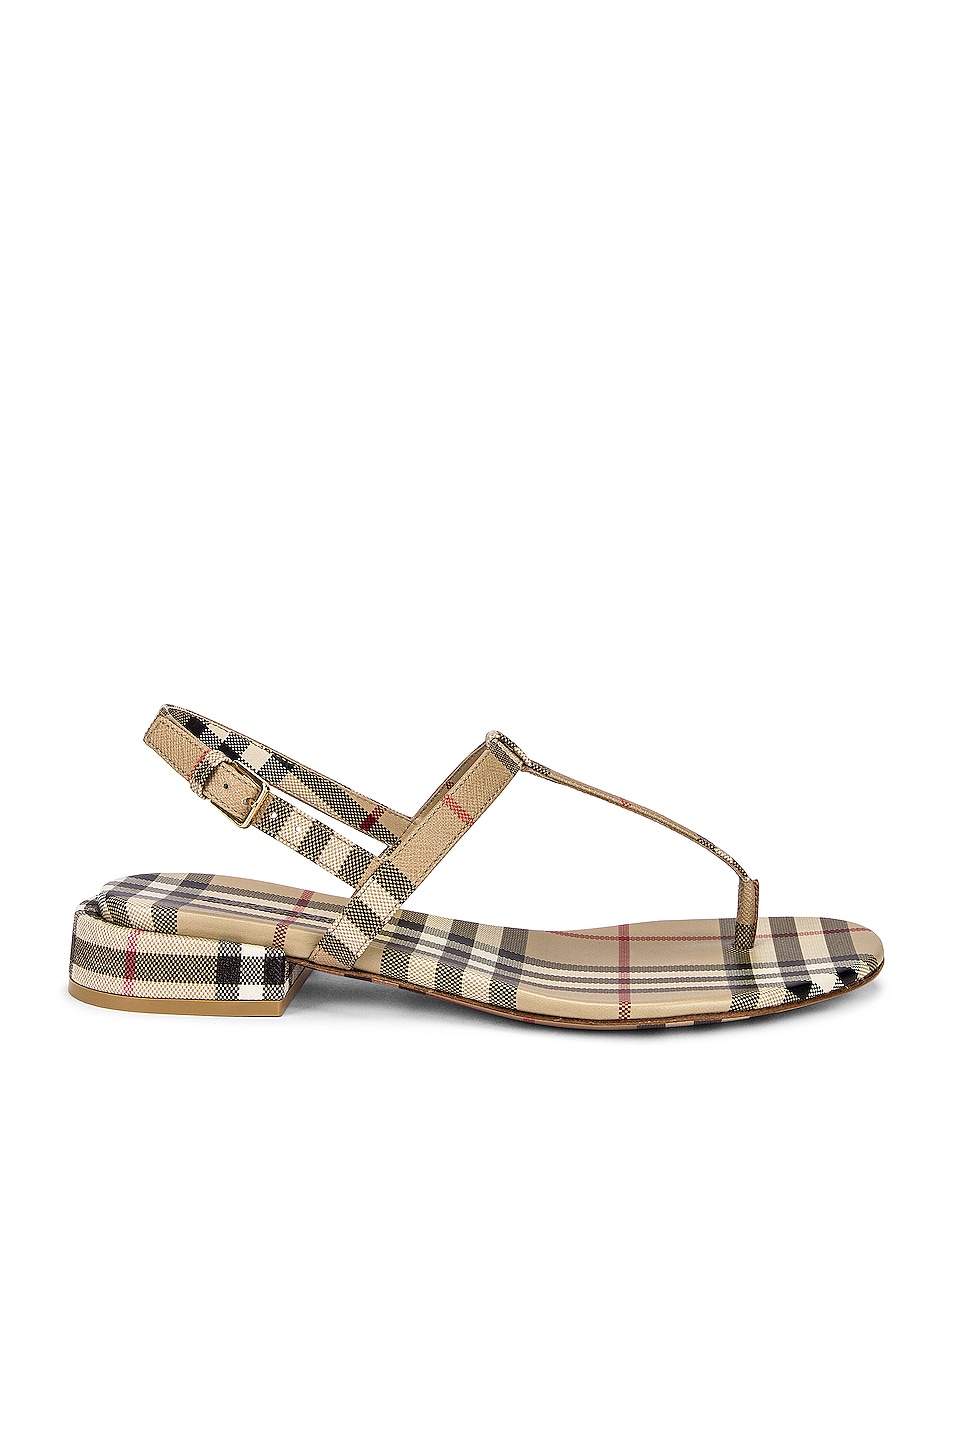 Image 1 of Burberry Emily Check Sandals in Archive Beige IP Check